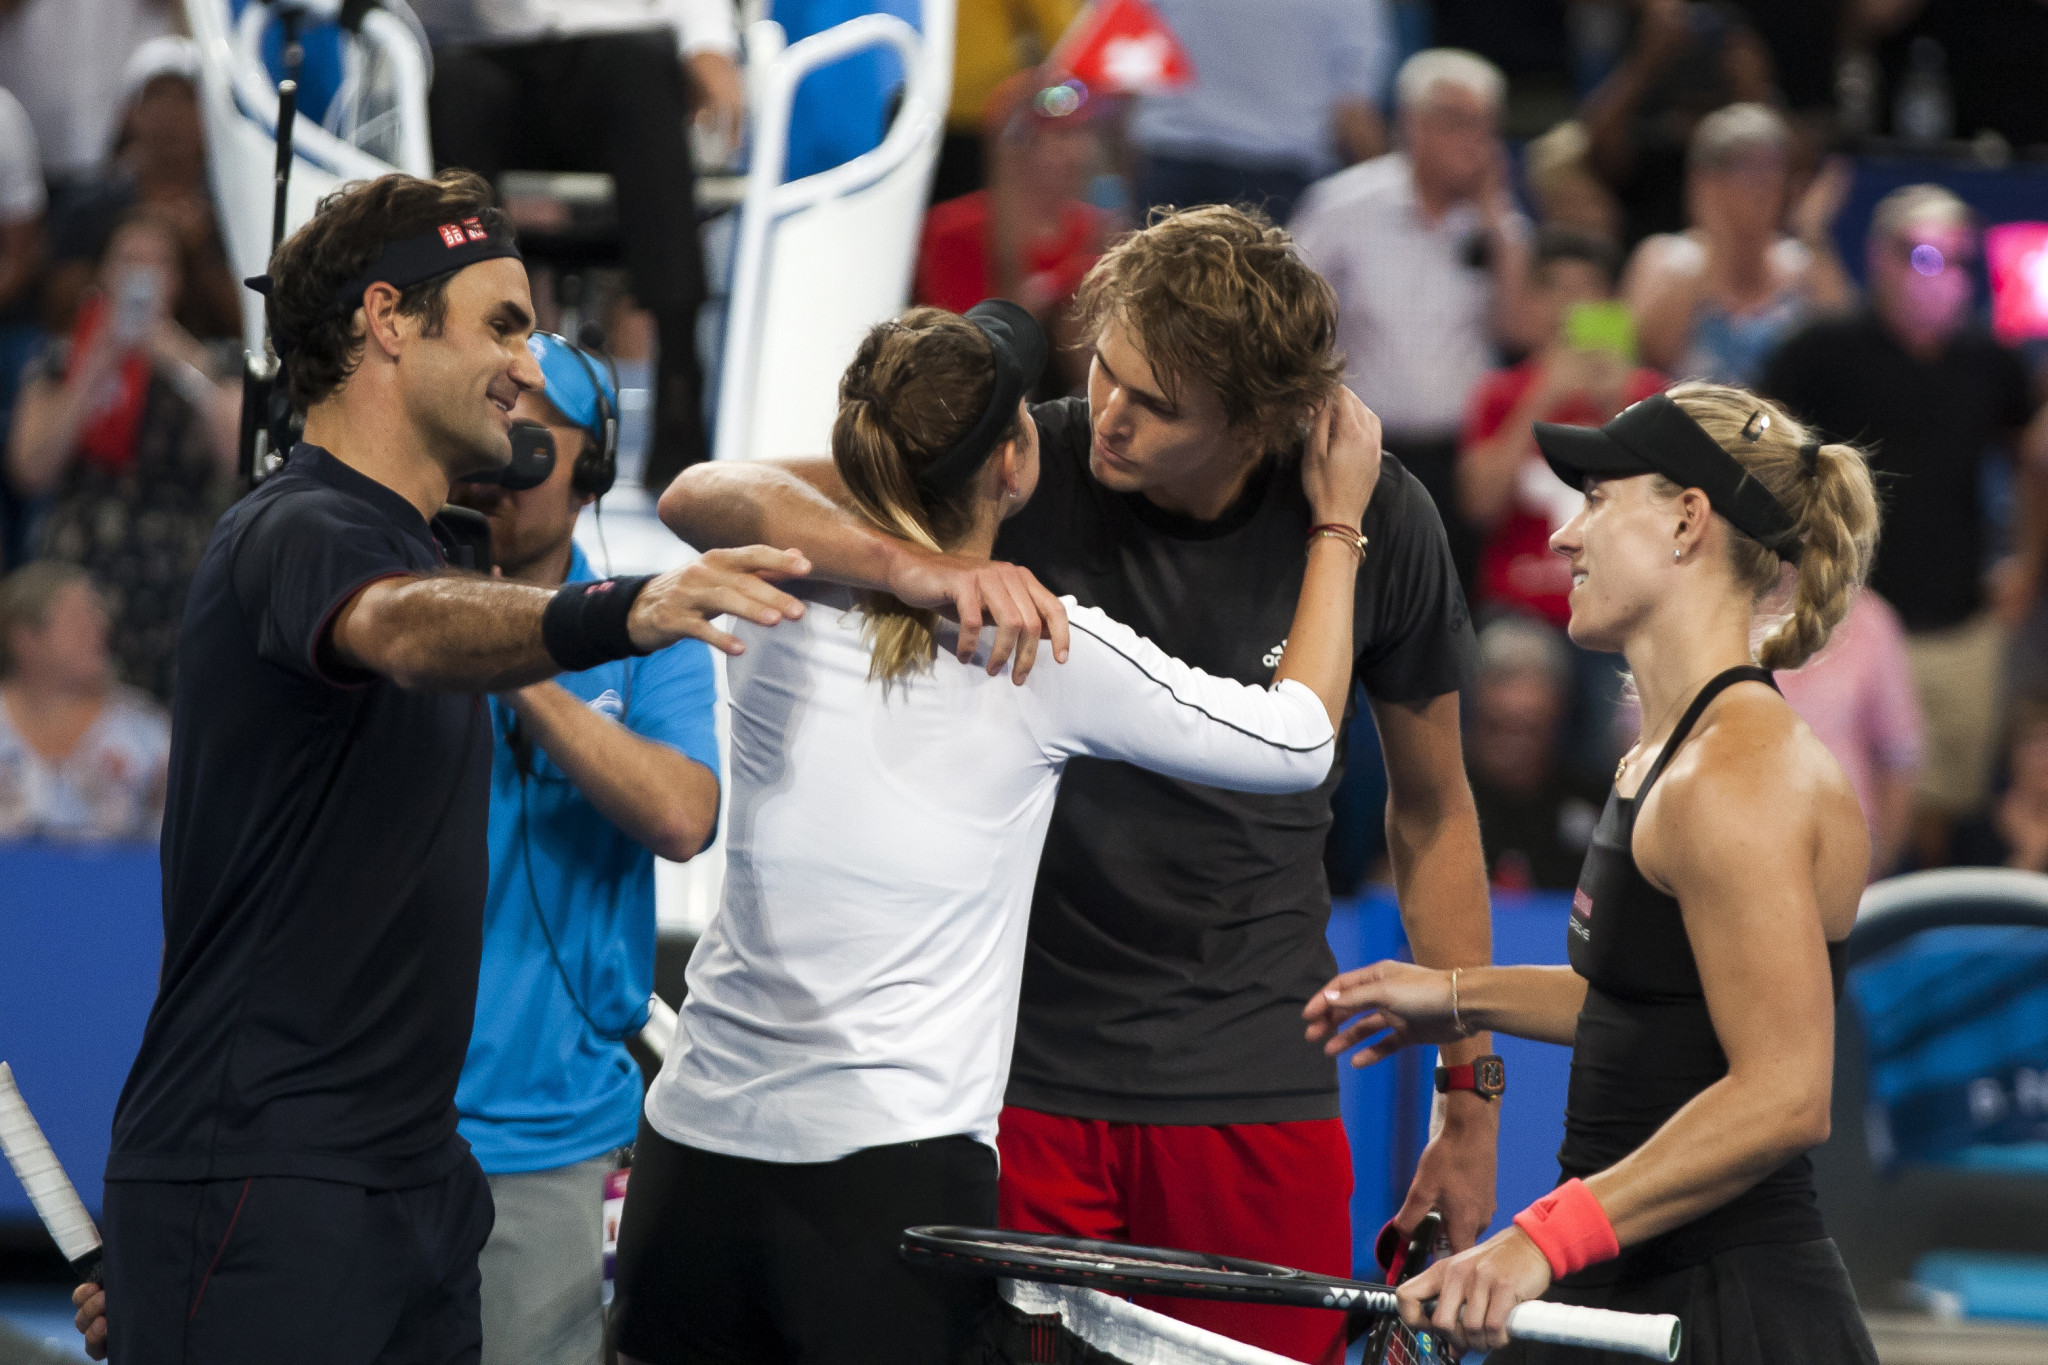 Angelique Kerber, right, with Alexander Zverev, second right after playing in the Hopman Cup this year against Roger Federer and Belinda Bencic - a partnership they may renew for Tokyo 2020 ©Getty Images